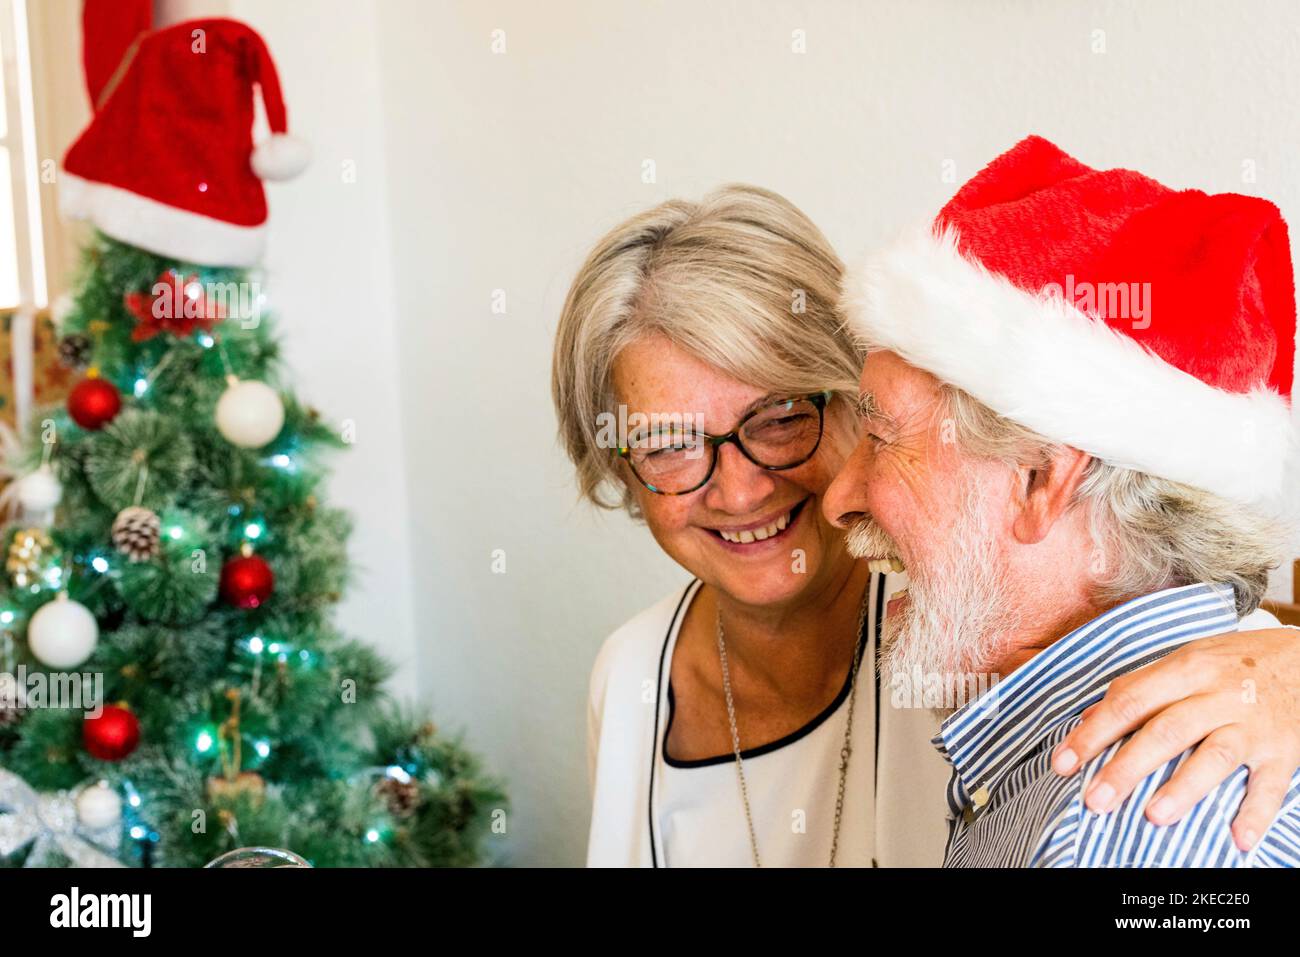 couple of two old people pensioners having fun and laughing together at home with a christmas tree at the background and with the mature man wearing christmas cap or hat Stock Photo